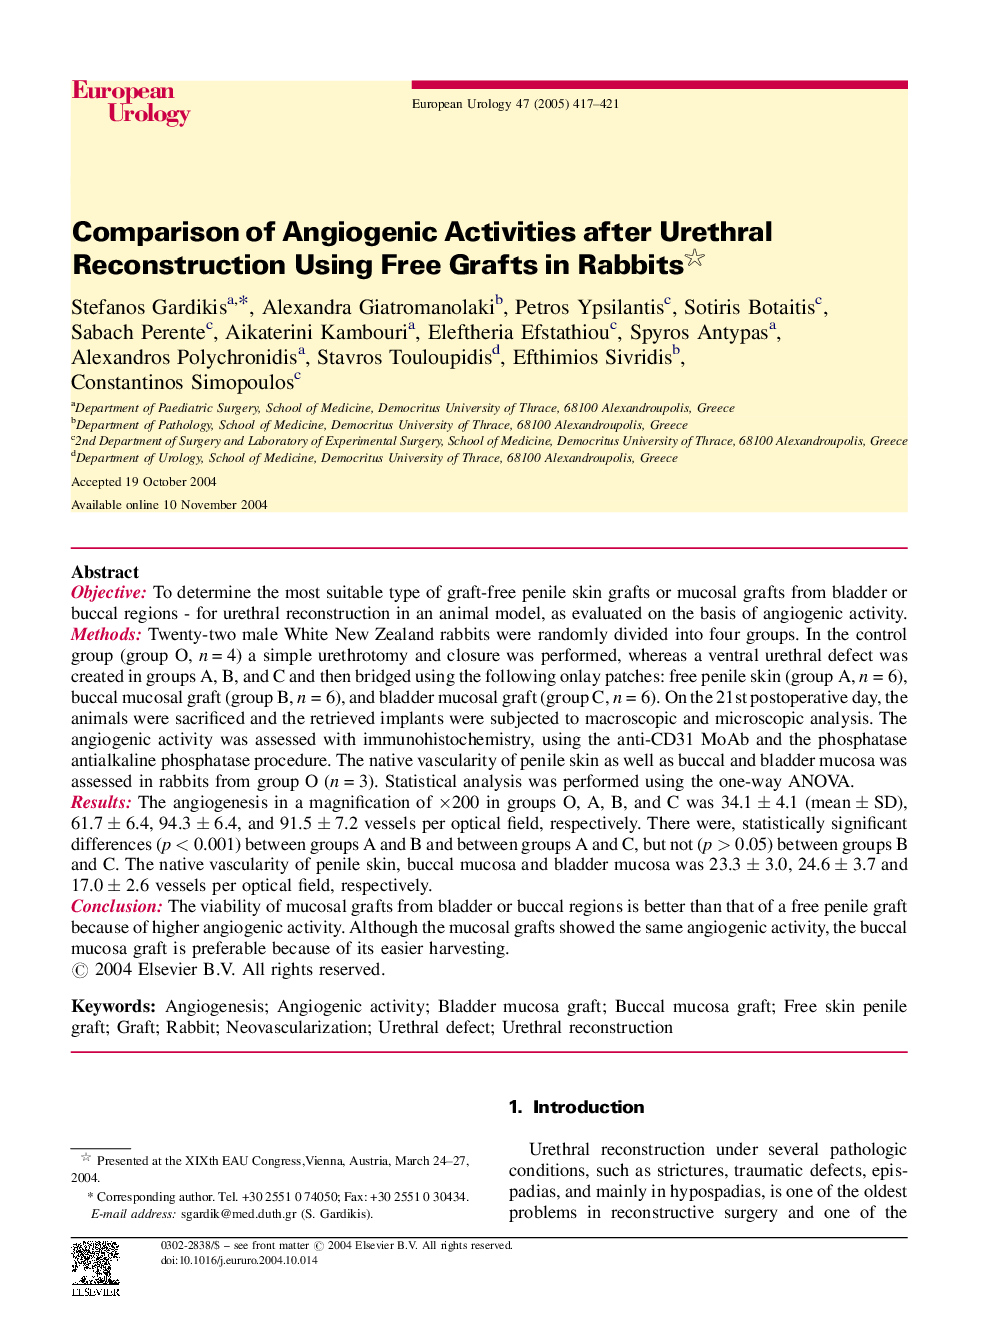 Comparison of Angiogenic Activities after Urethral Reconstruction Using Free Grafts in Rabbits